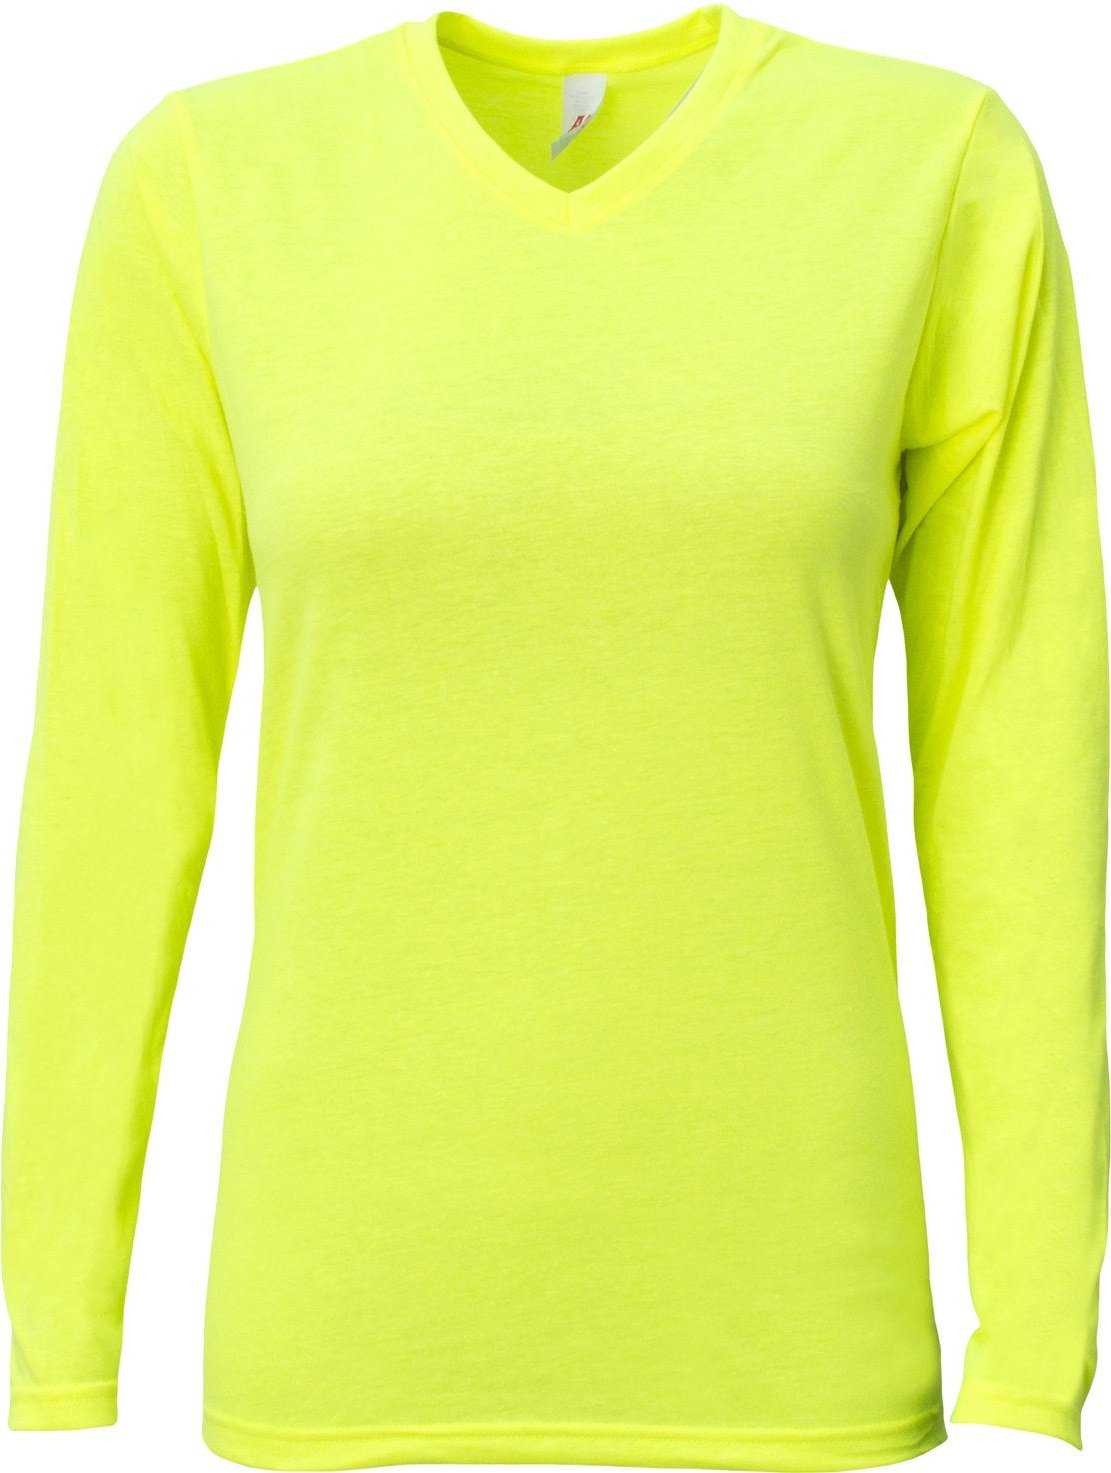 A4 NW3029 Ladies' Long-Sleeve Softek V-Neck T-Shirt - SAFETY YELLOW - HIT a Double - 2